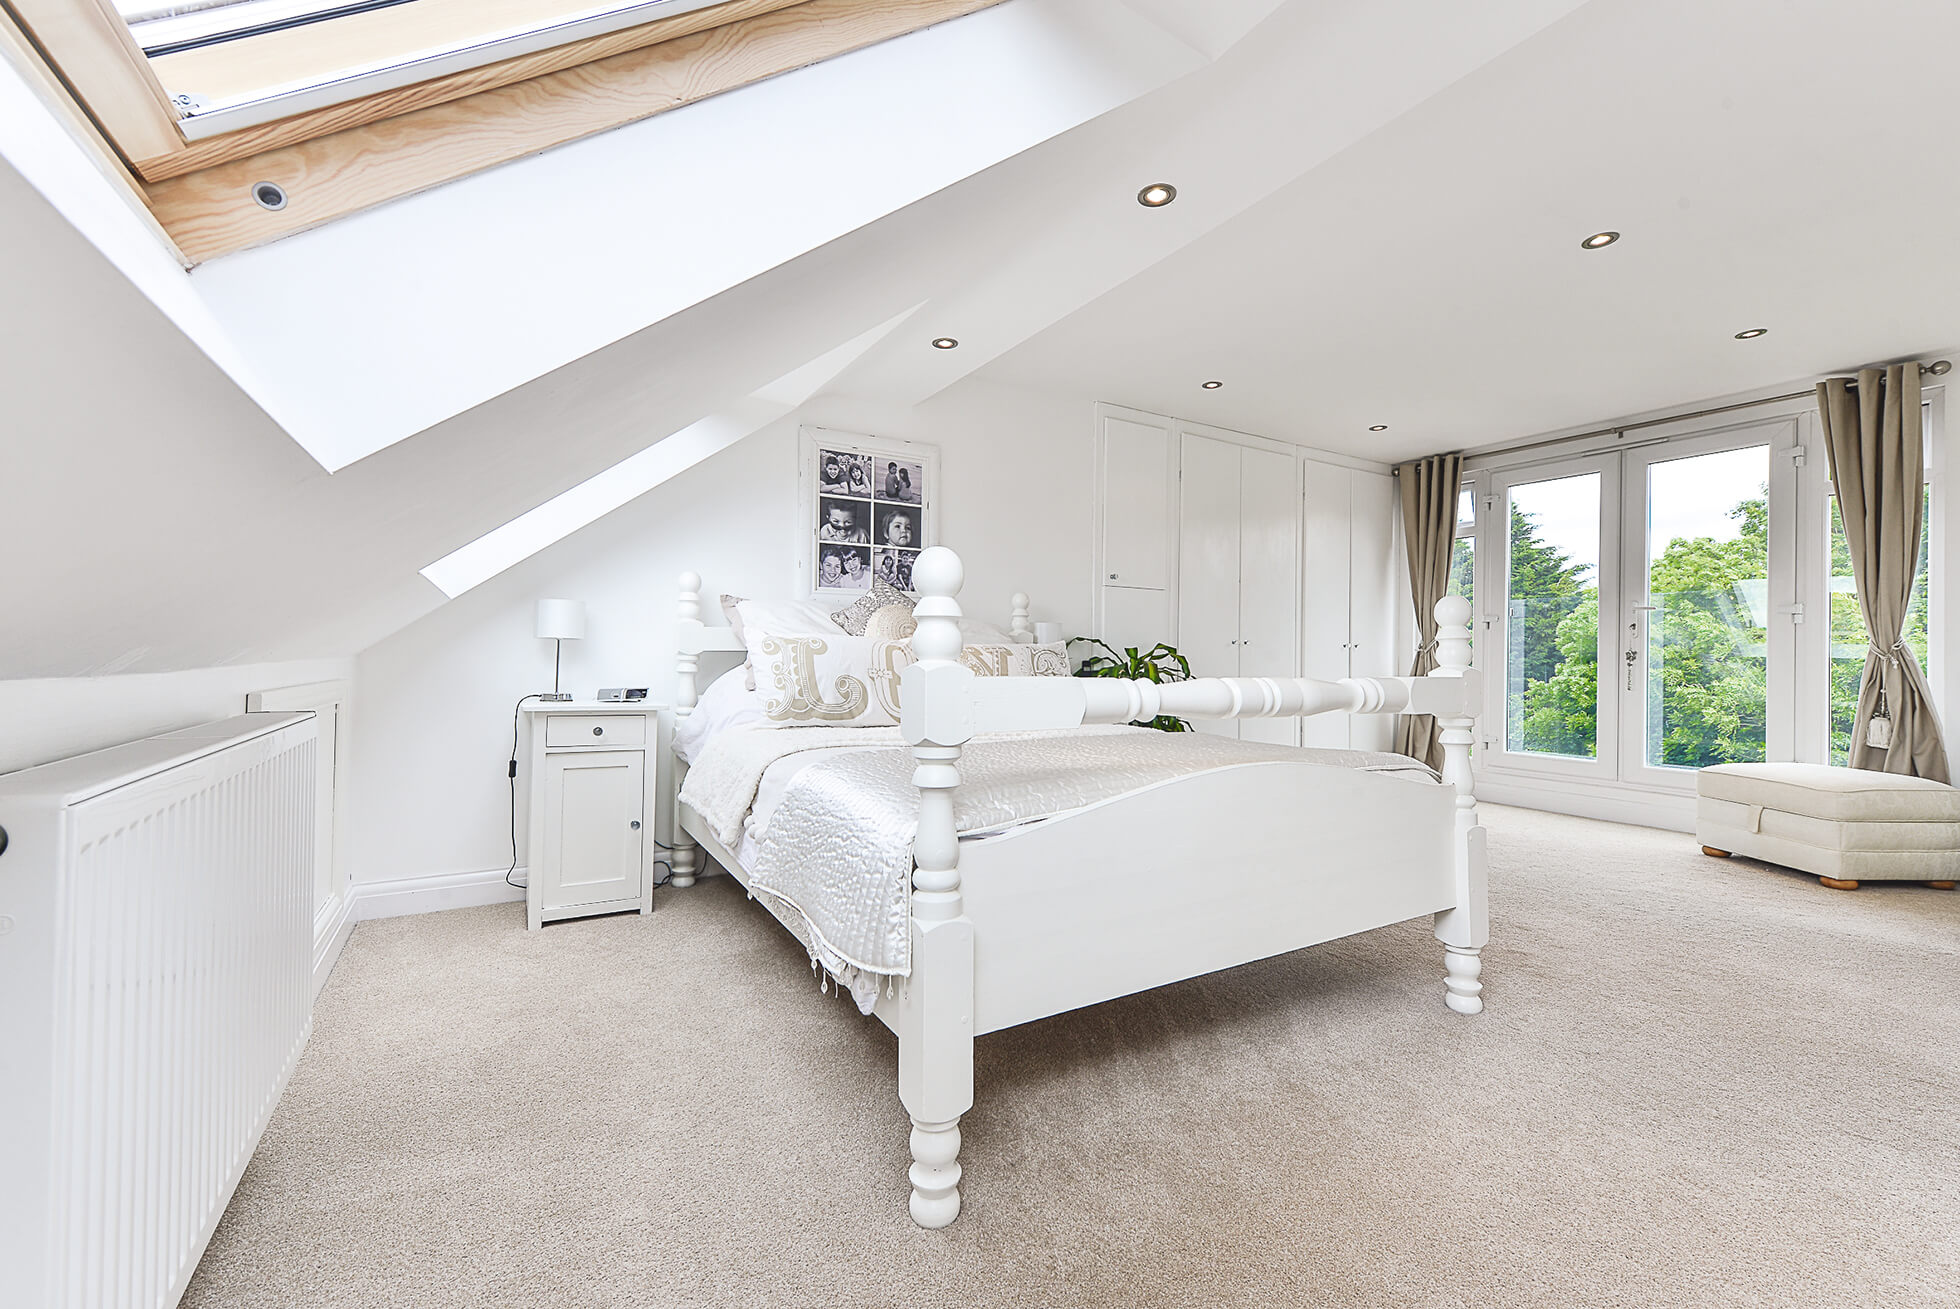 Do you have a question about converting your Loft in Newnham? Here are the most popular questions asked by our clients.